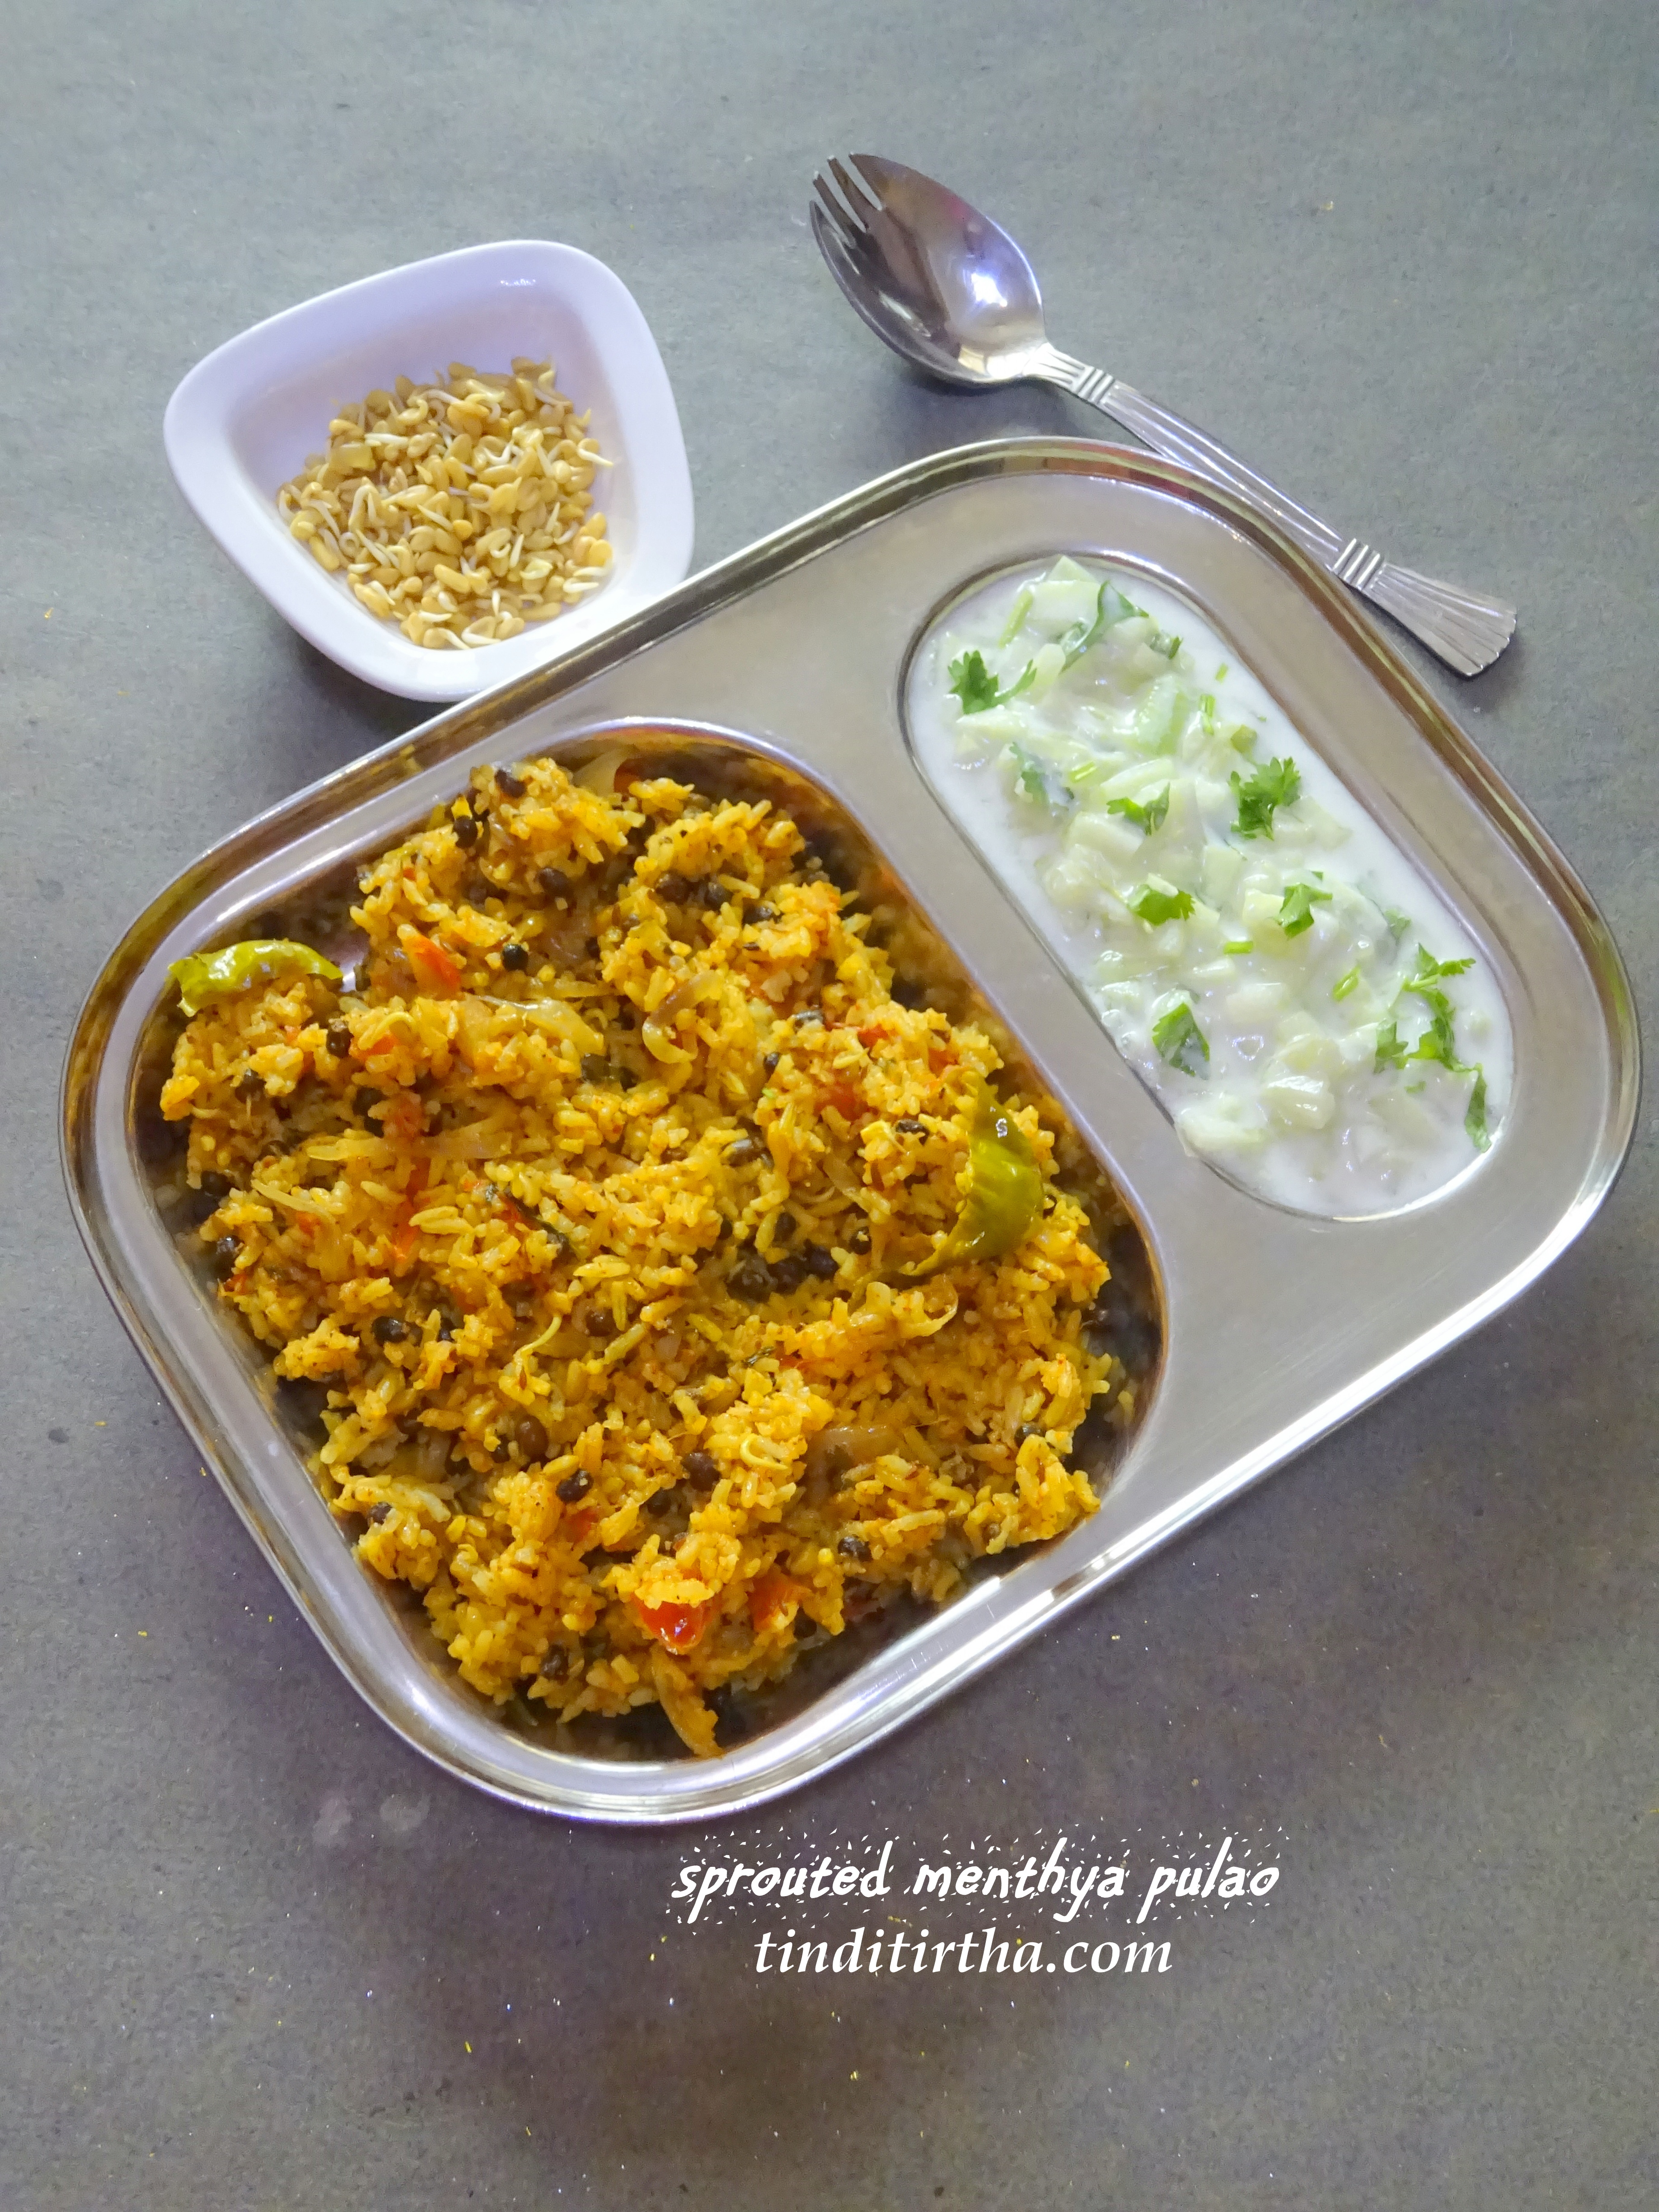 SPROUTED FENUGREEK SEEDS/MOLAKE MENTHYA PULAO